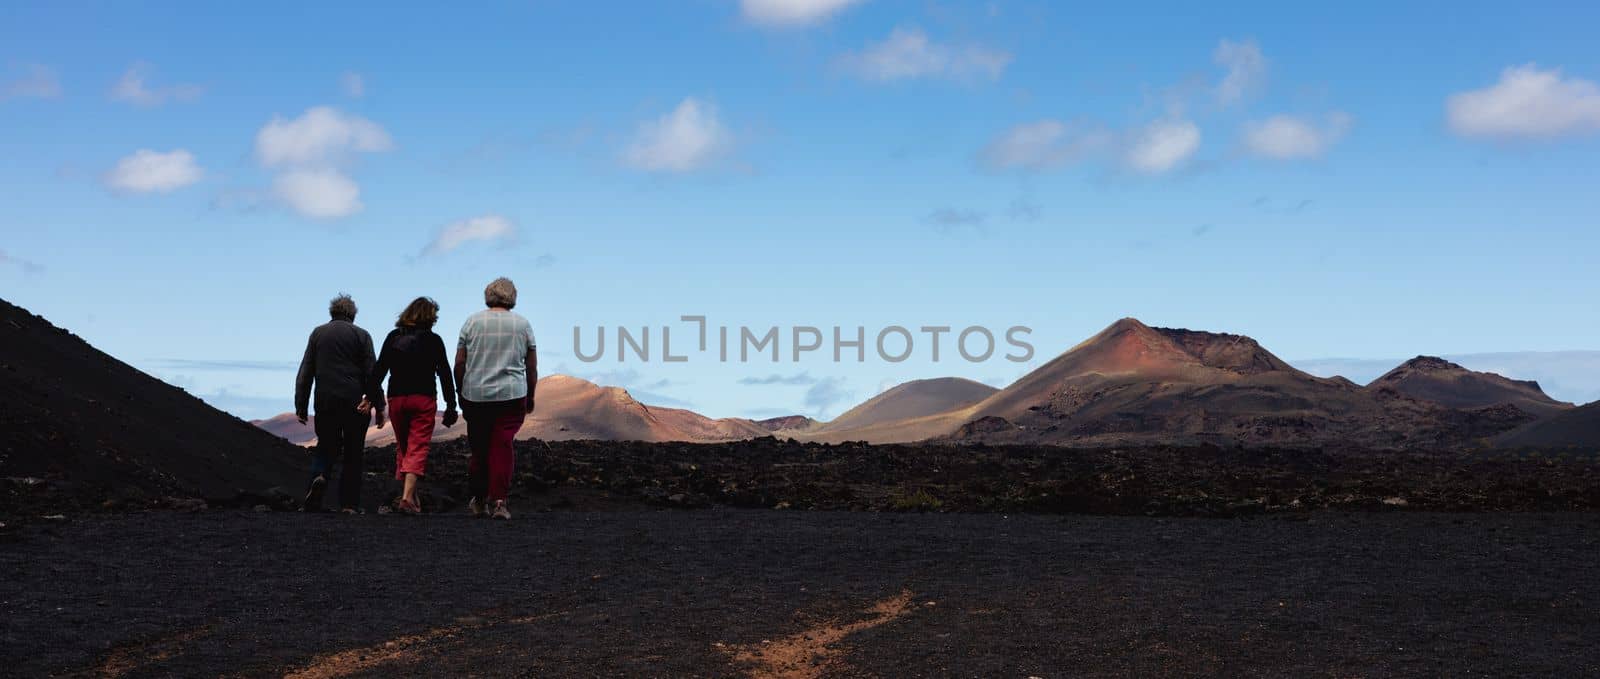 Tourists visiting volcanic landscape of Timanfaya National Park in Lanzarote. Popular touristic attraction in Lanzarote island, Canary Islands, Spain. by kasto